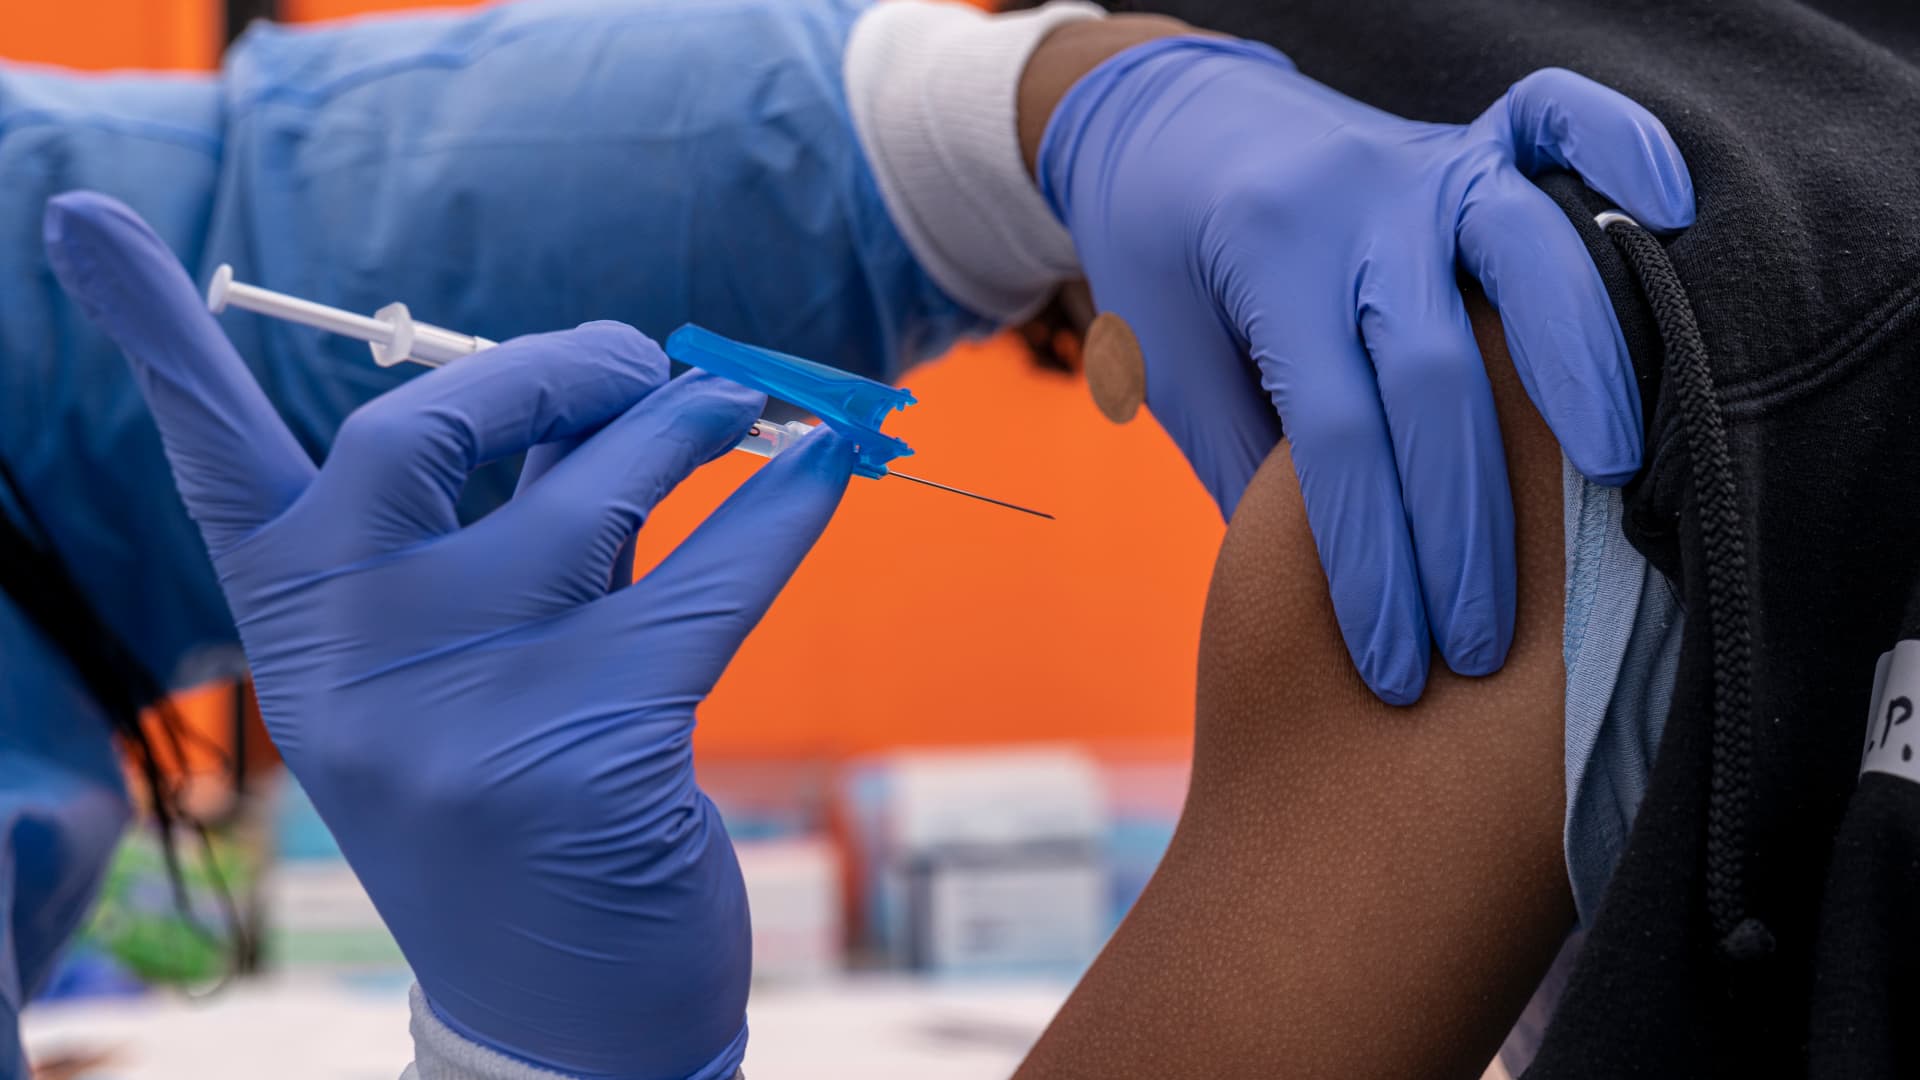 A healthcare worker administers a Pfizer-BioNTech Covid-19 vaccine to a child at a testing and vaccination site in San Francisco, California, U.S., on Monday, Jan. 10, 2022.